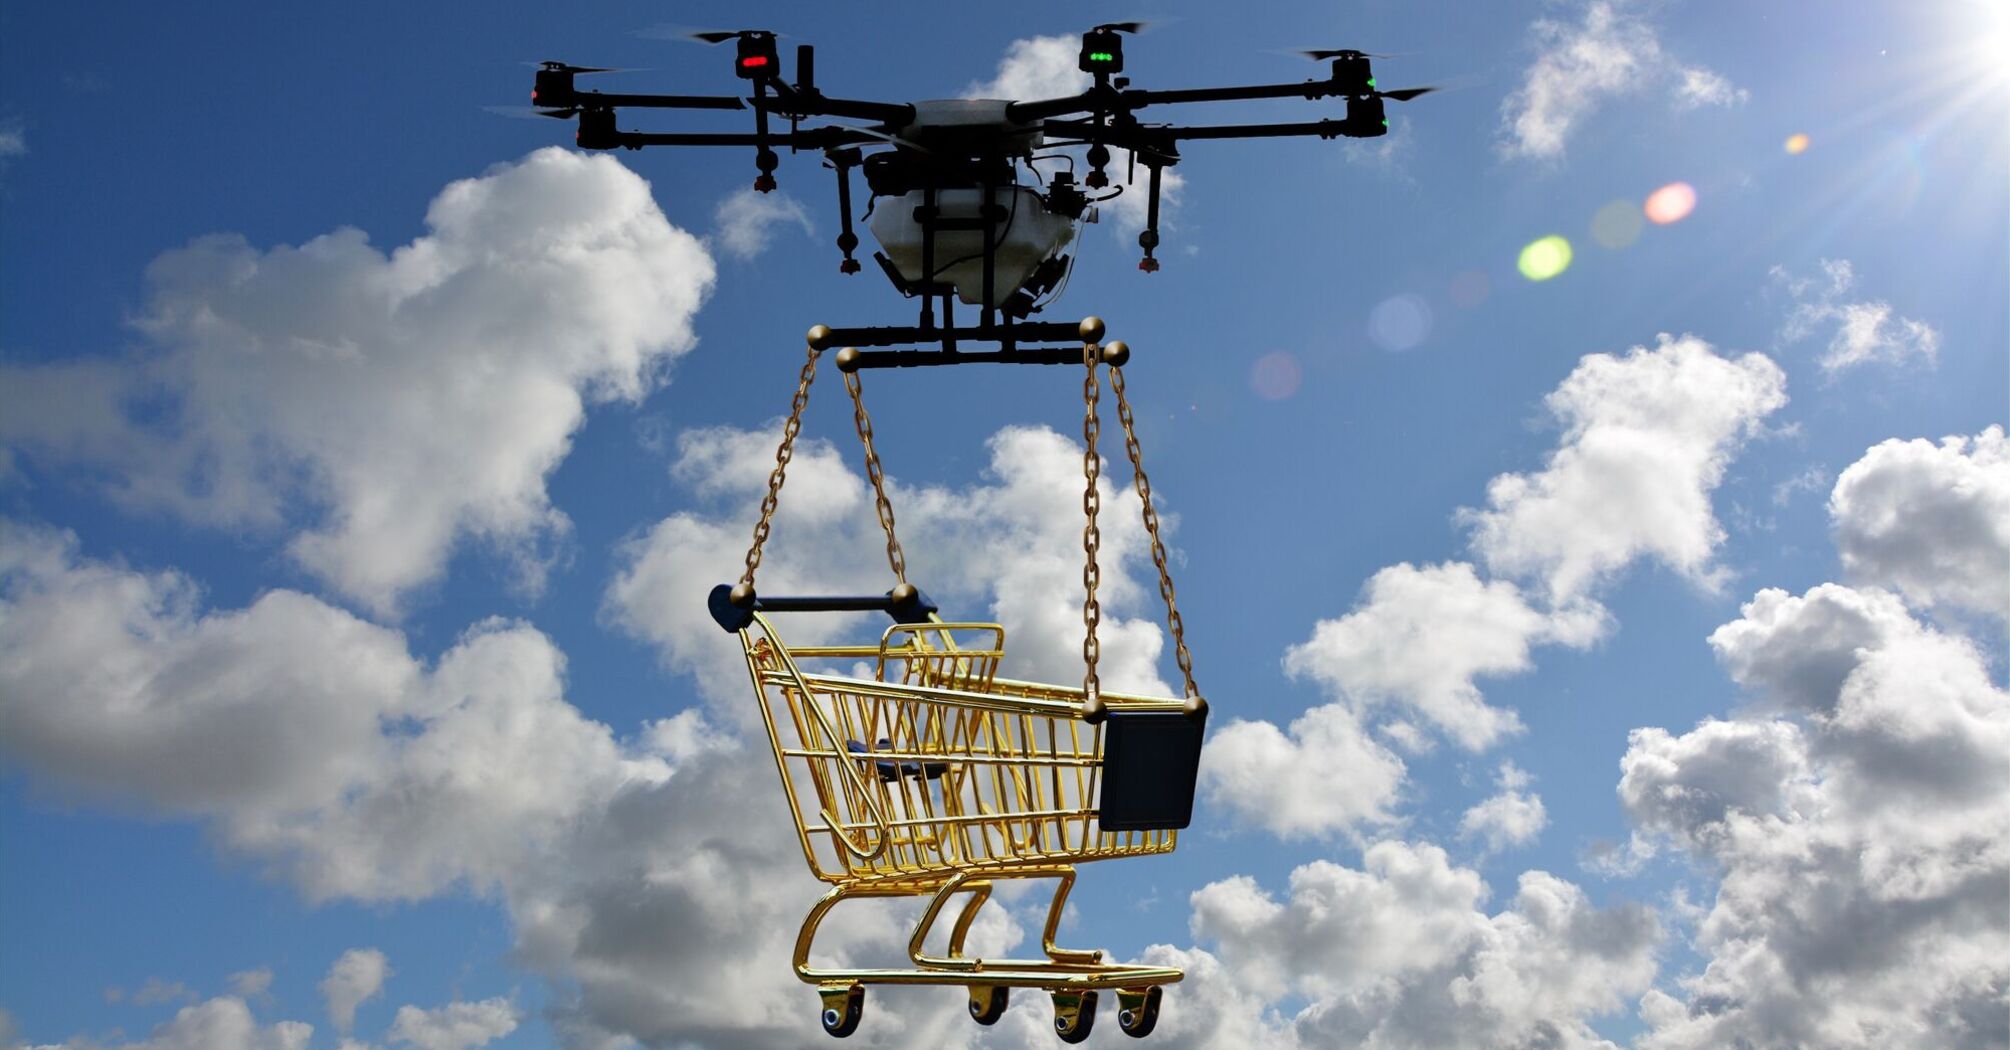 A drone flying in a blue sky with fluffy white clouds, carrying a miniature gold shopping cart suspended by chains 